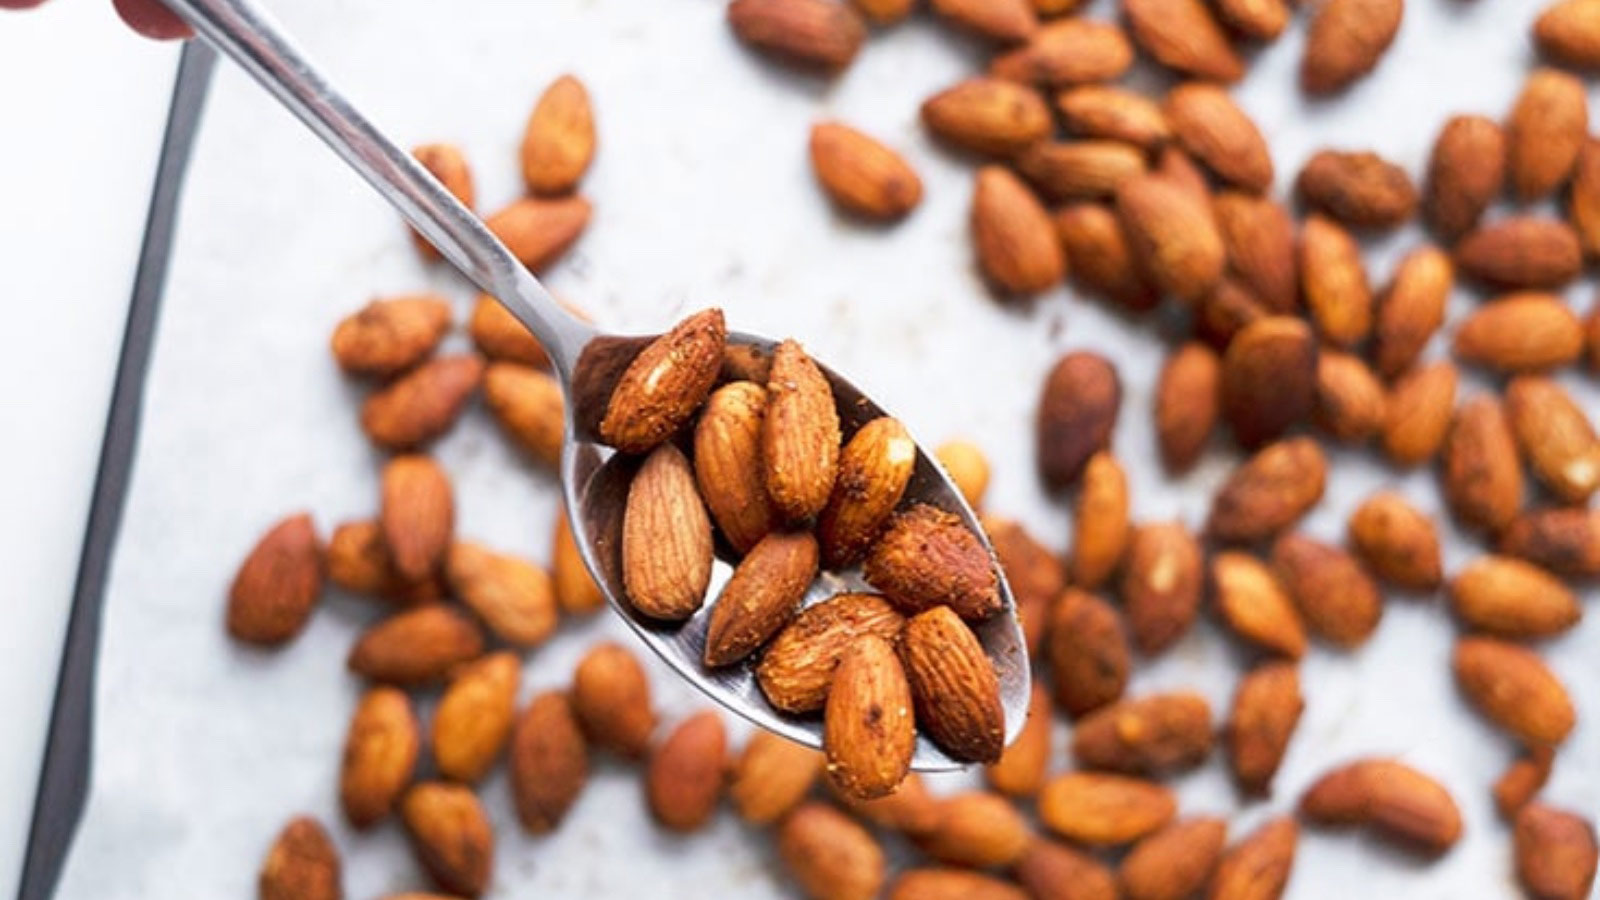 <p>These <a href="https://www.thegraciouspantry.com/clean-eating-spicy-roasted-almonds/">spicy roasted almonds</a> are a delicious protein-packed snack that you can just grab and go. They are easy to make with raw almonds and spices that you already have in your pantry. These almonds are good to eat with no refrigeration for two weeks; if you keep them in the fridge, they can be stored for up to one year. </p>